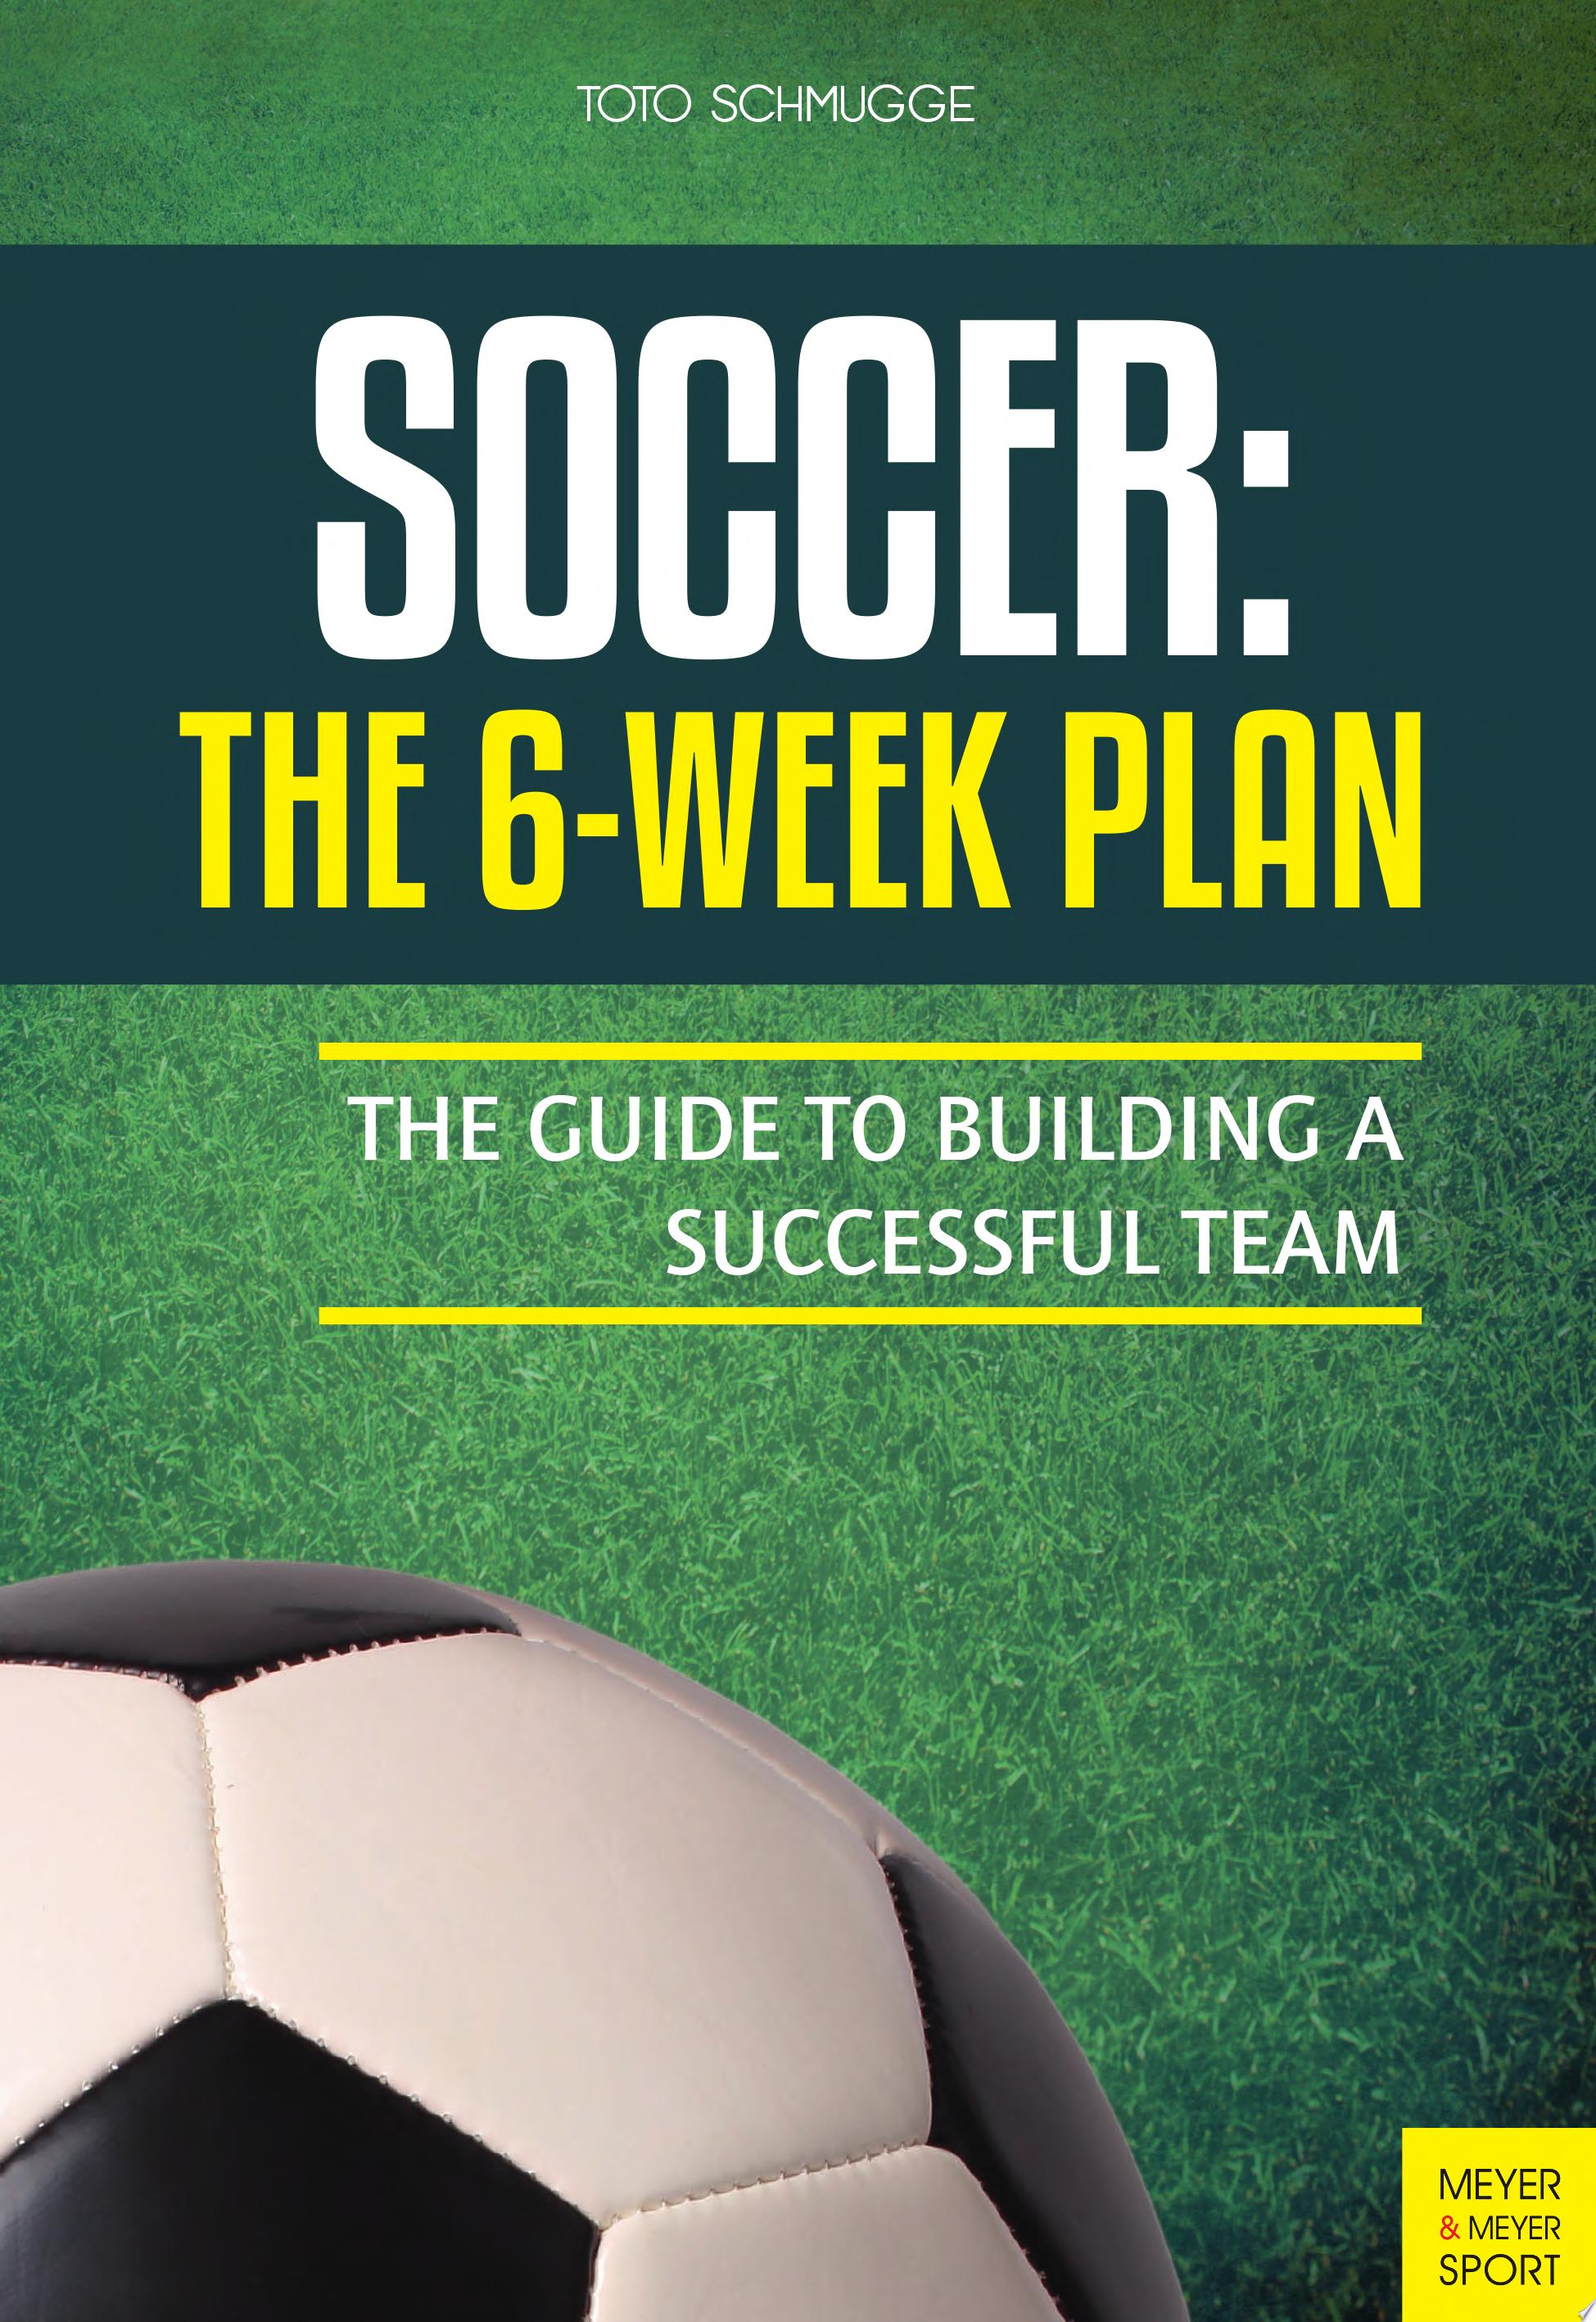 Image for "Soccer: The 6-Week Plan"